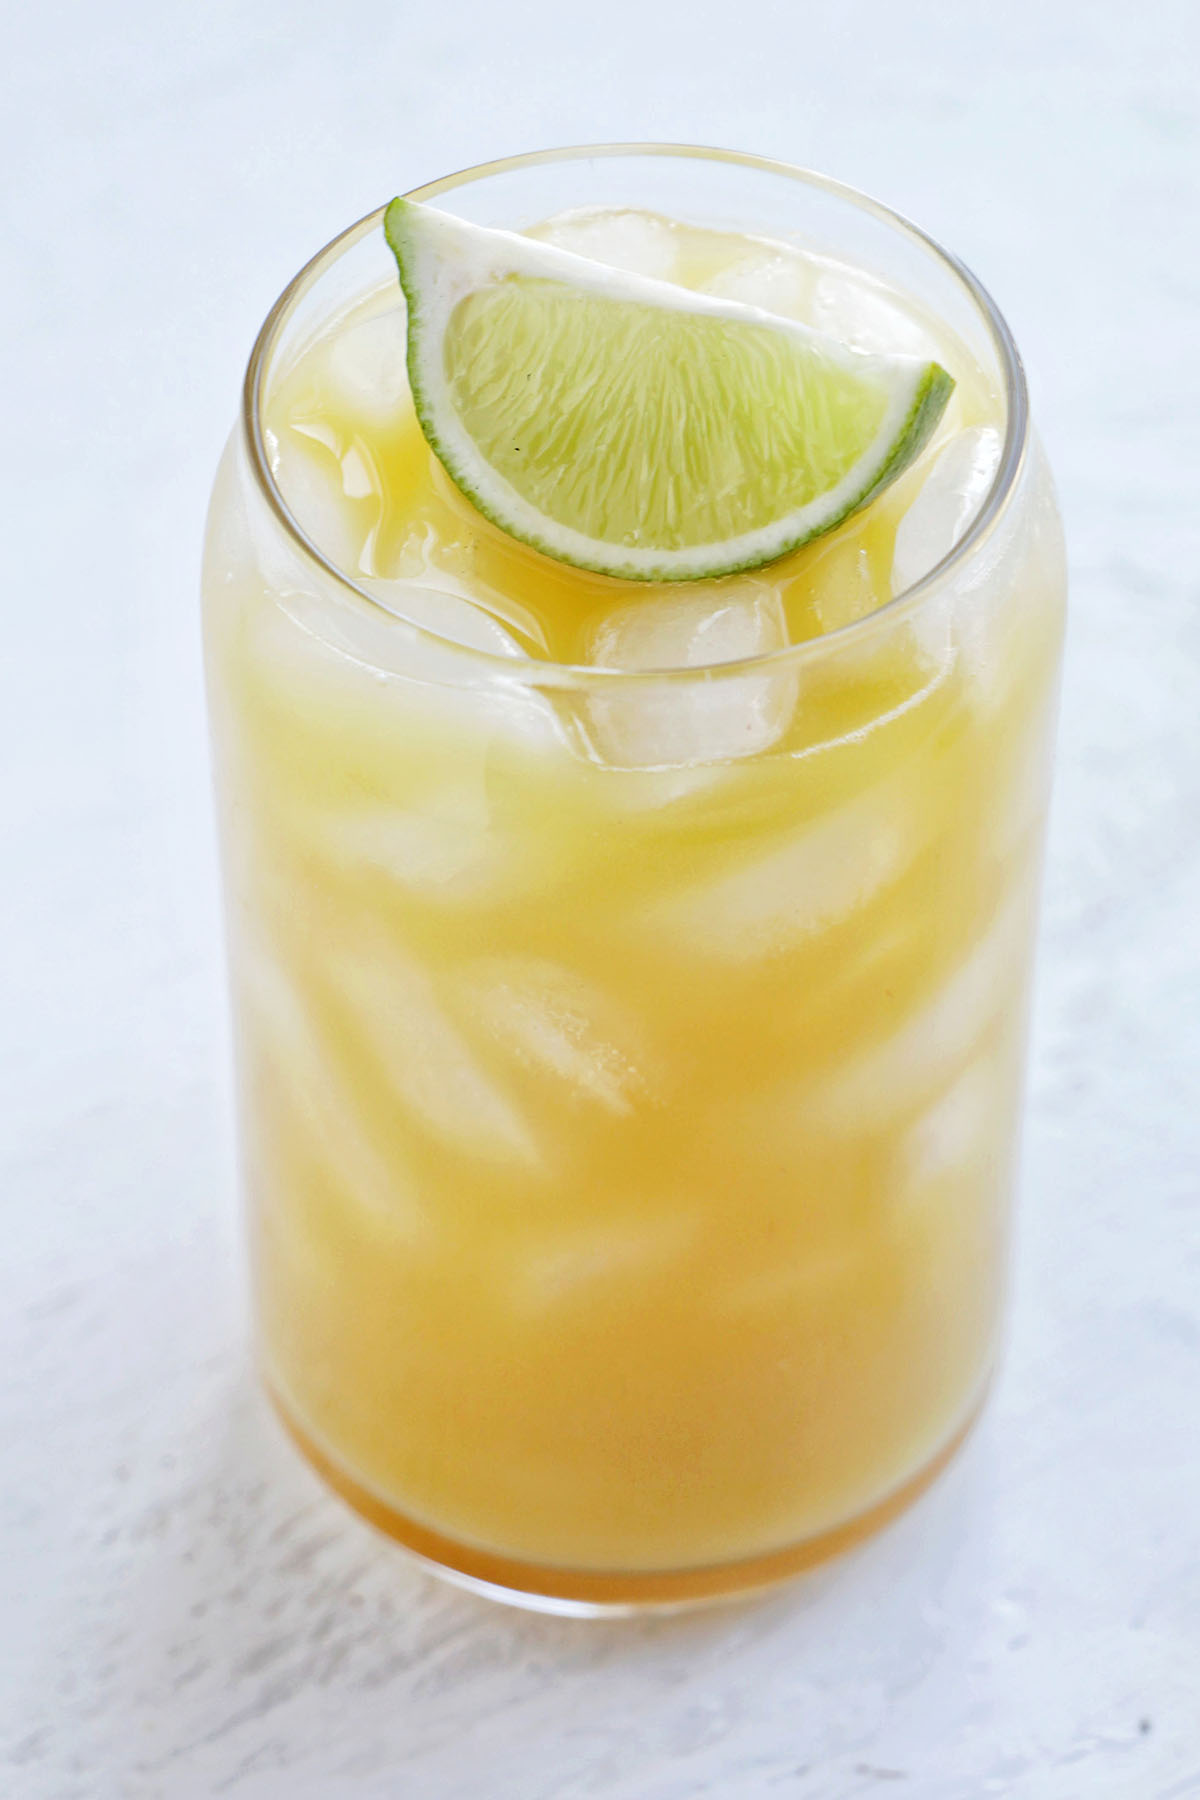 tequila pineapple drink with lime garnish.